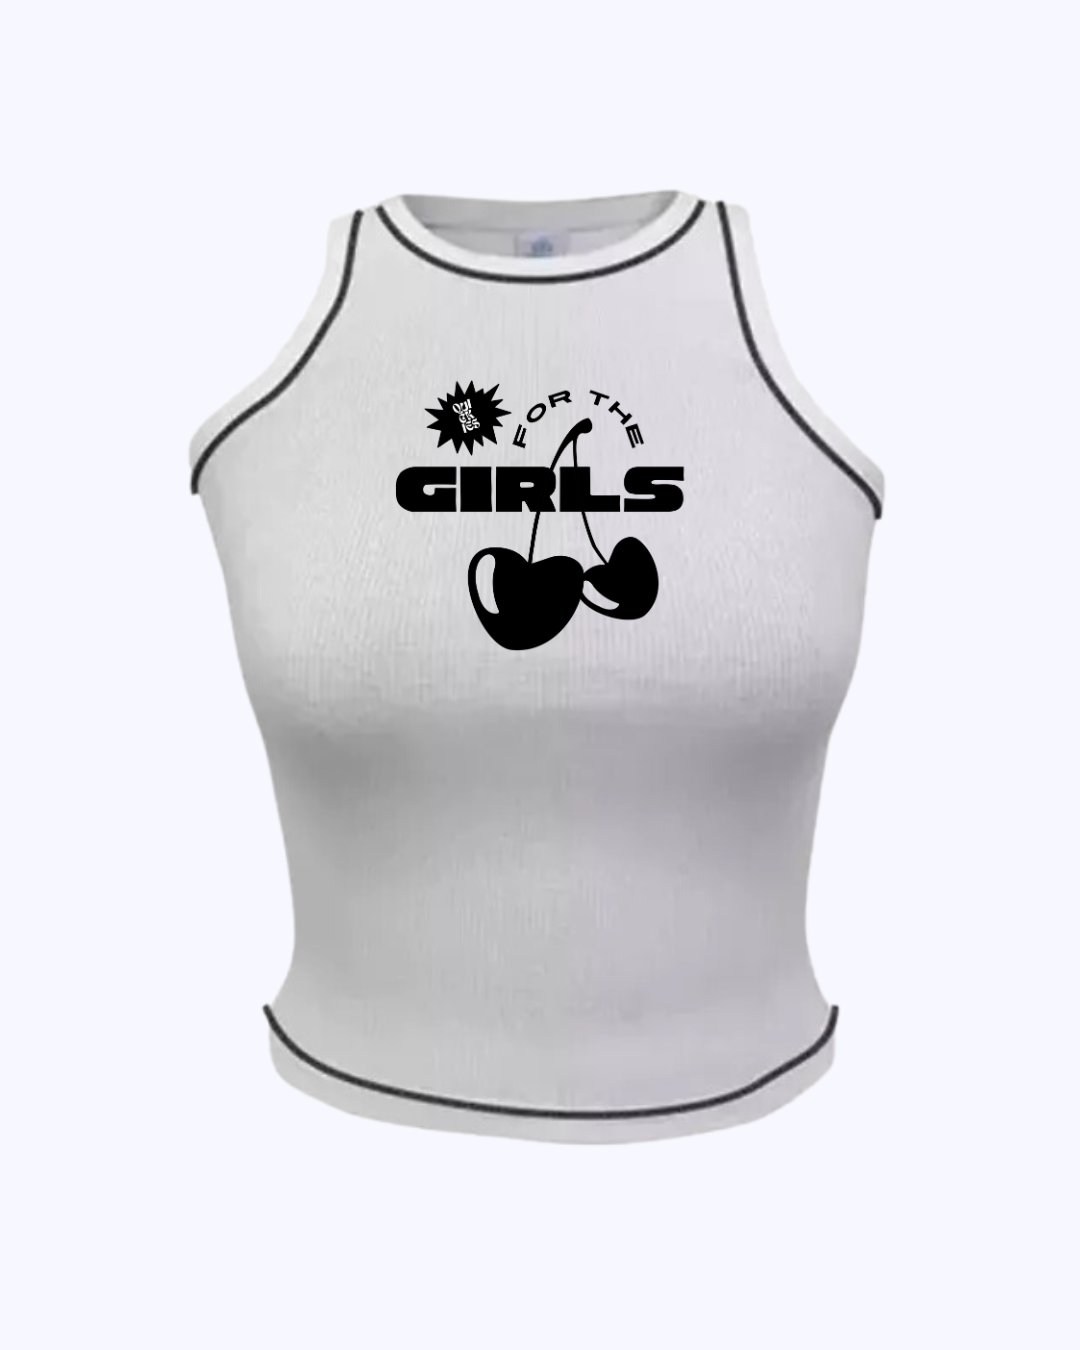 For The Girls Cropped Stitch Tank (Limited Edition)